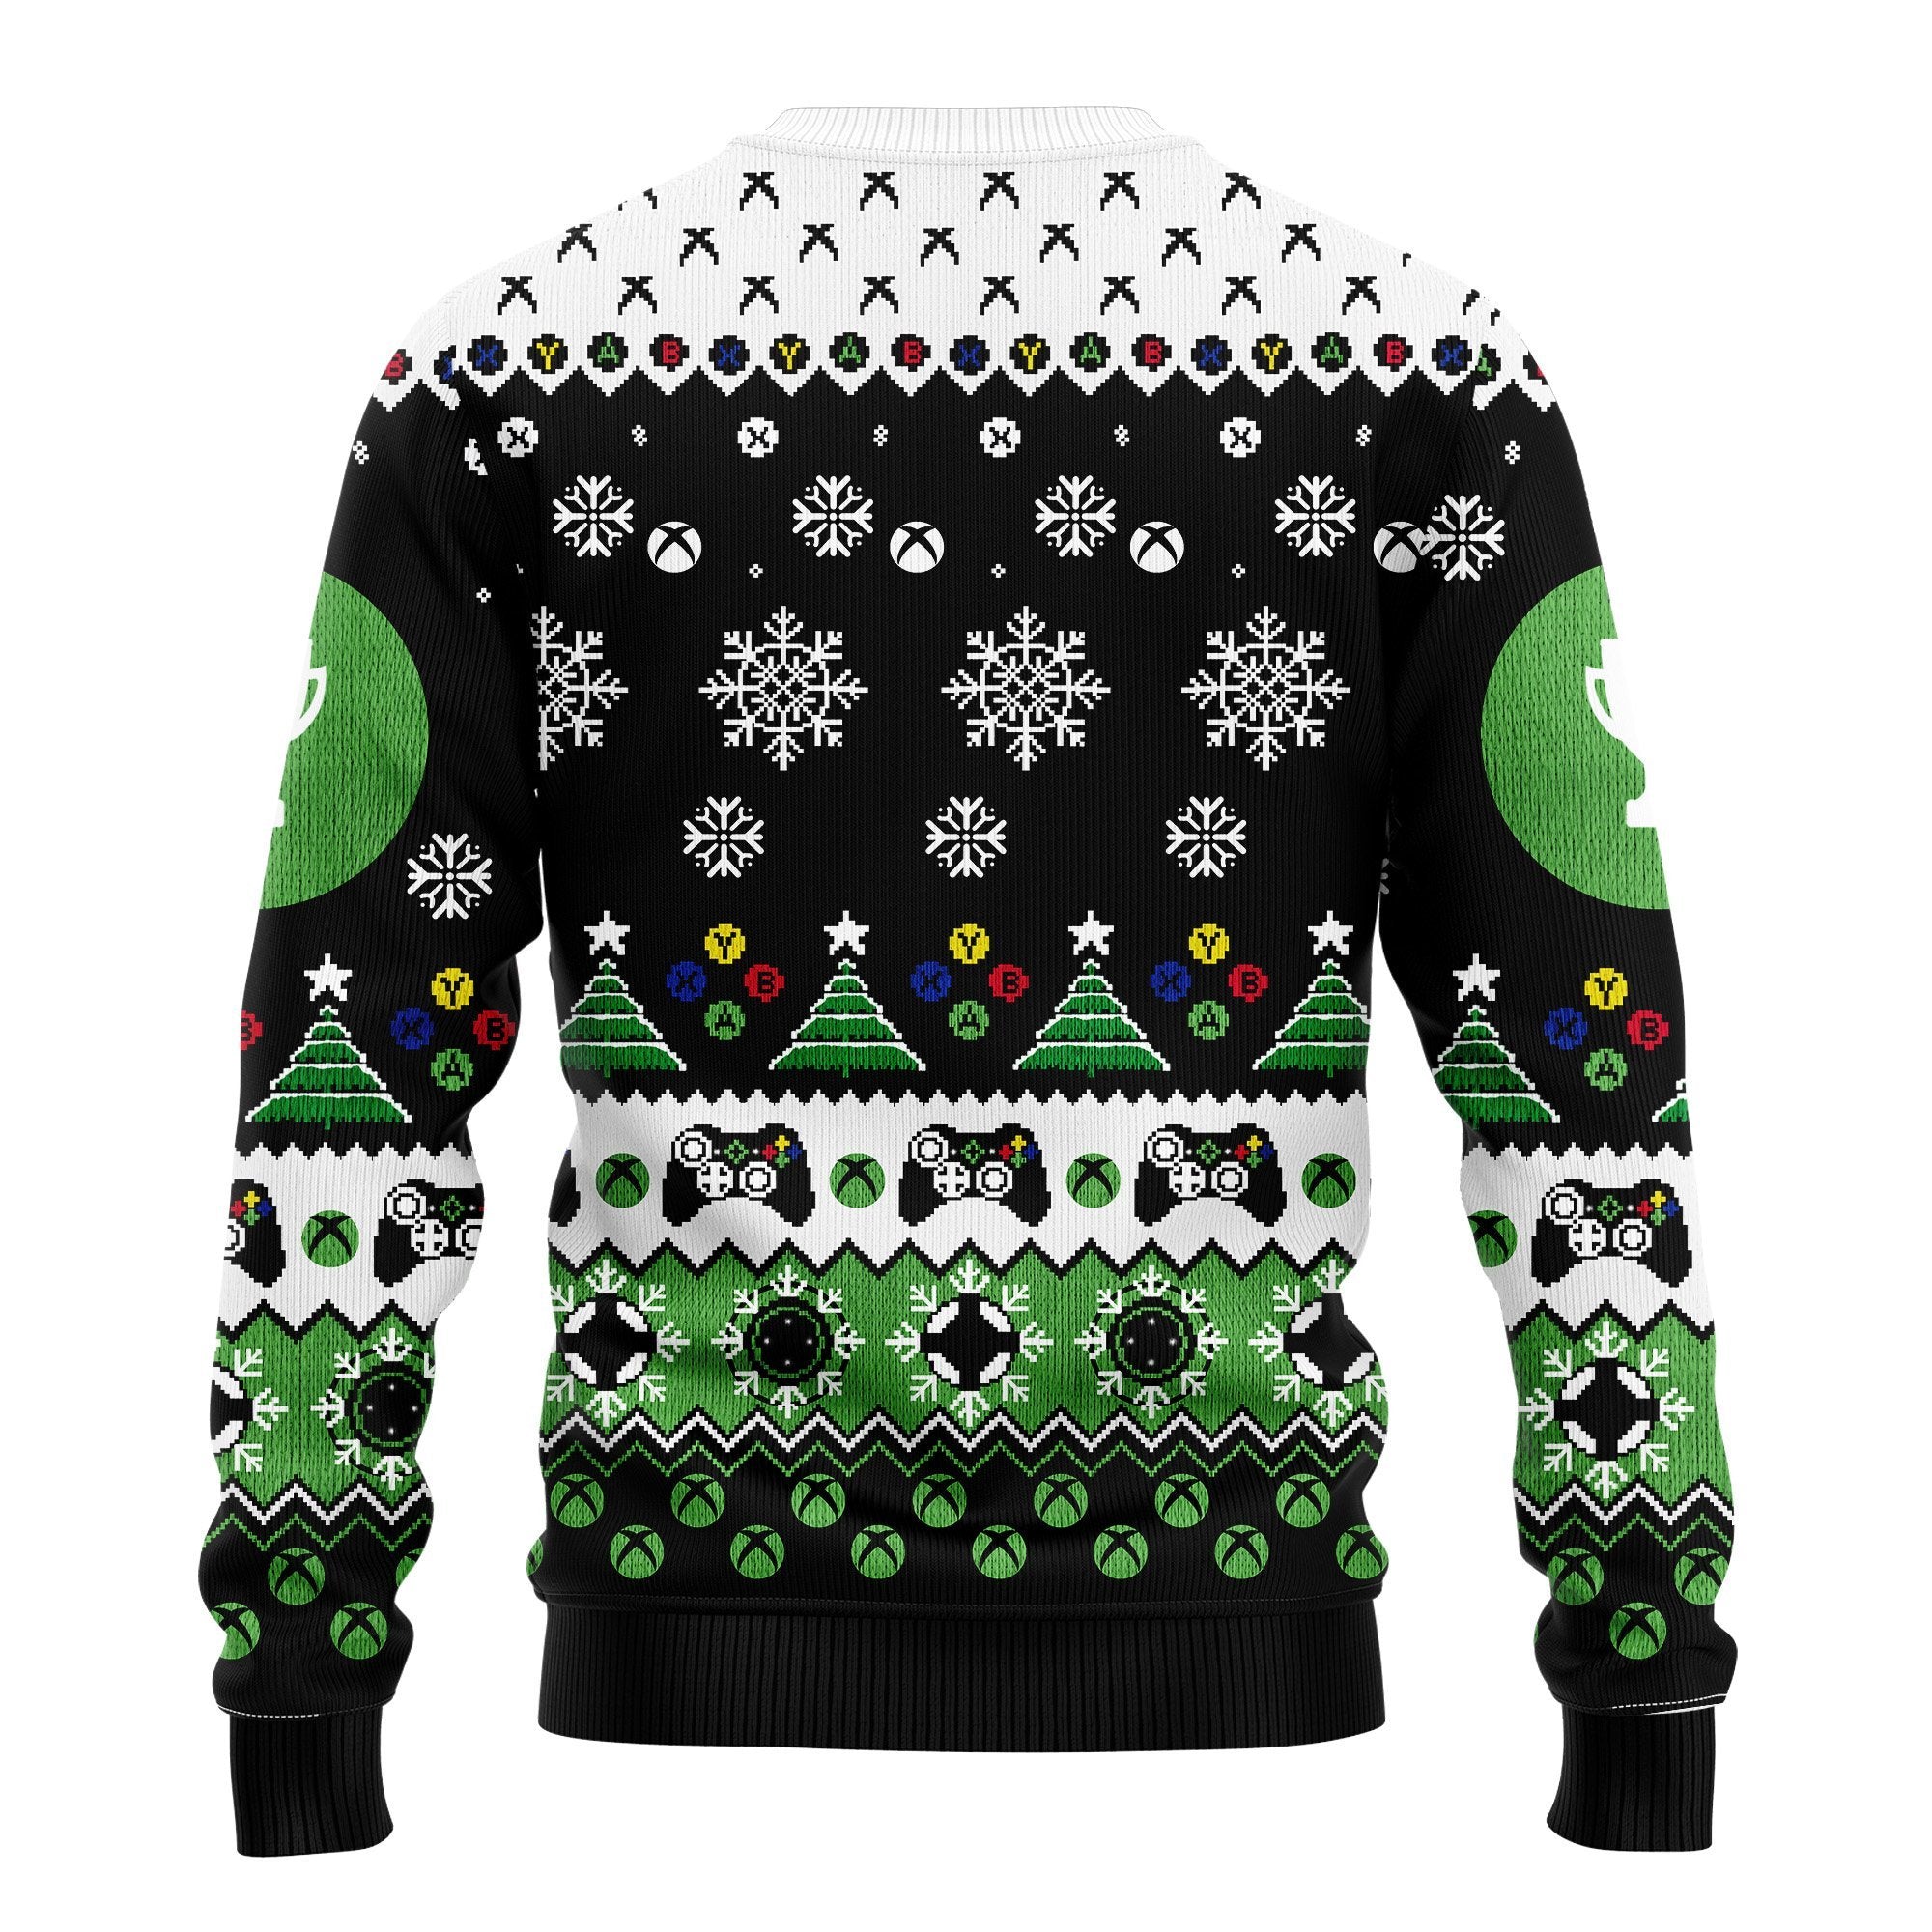 Xbox 360 Ugly Christmas Sweater Amazing Gift Idea Thanksgiving Gift